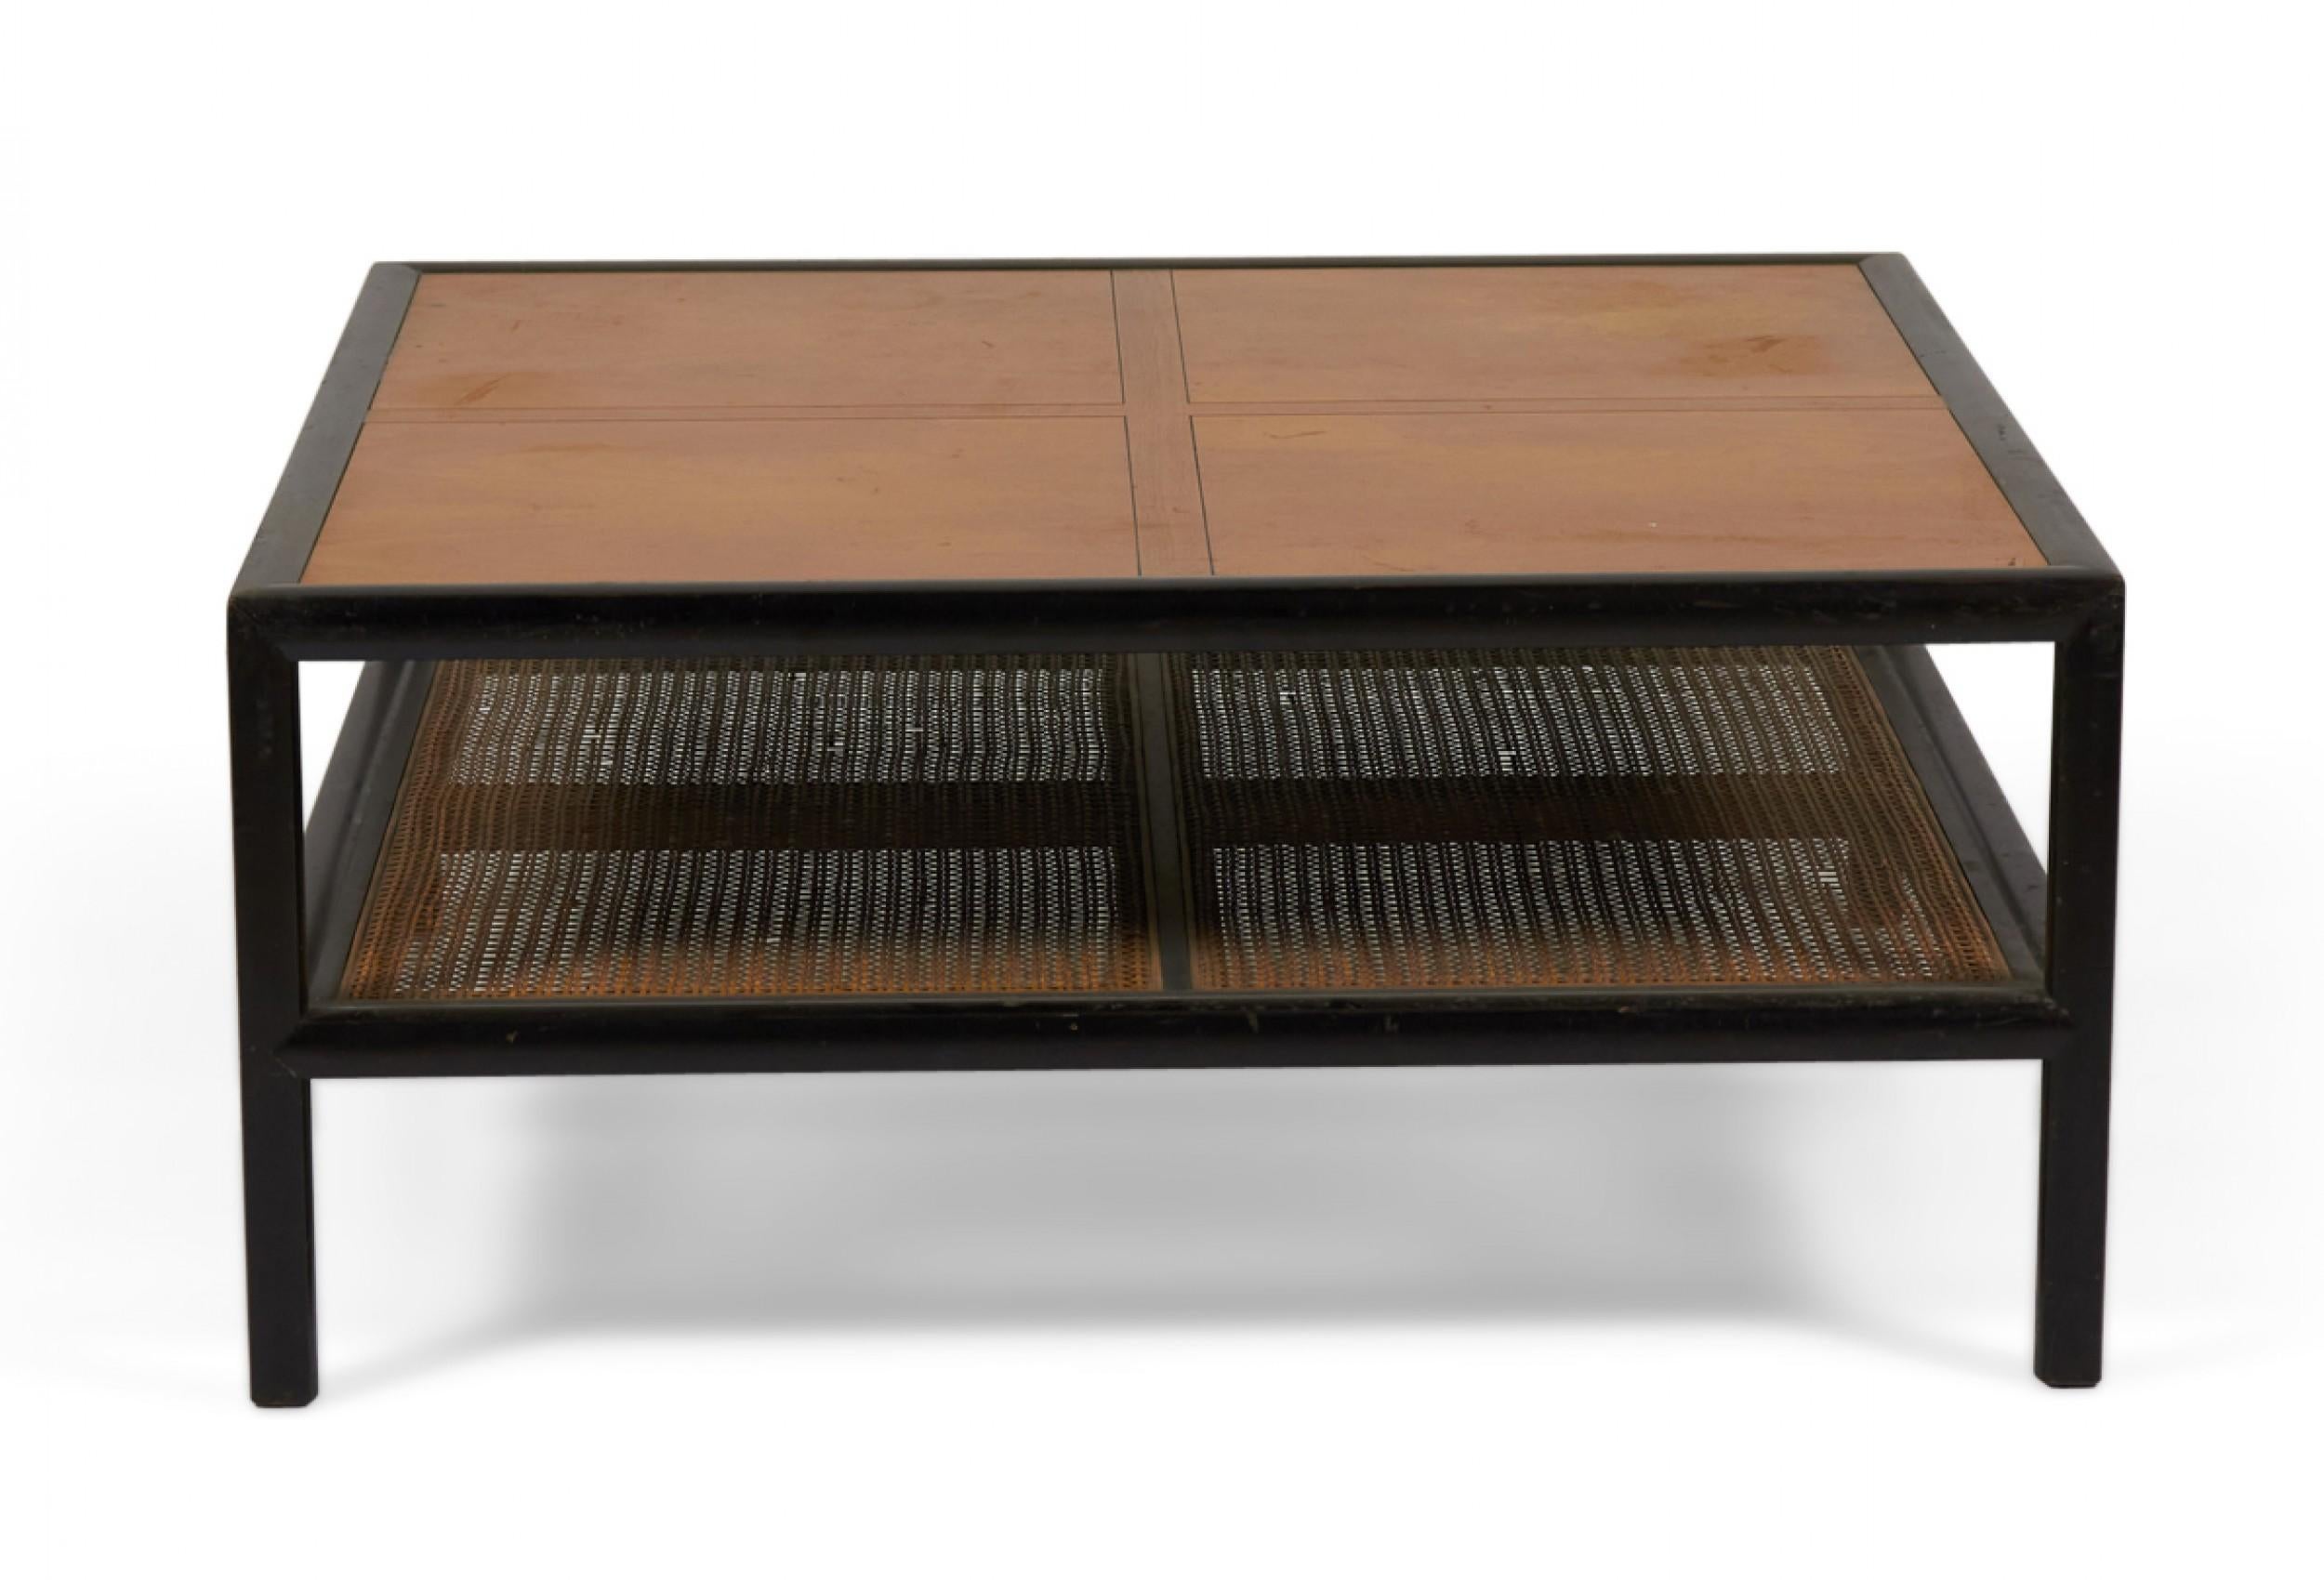 American mid-century 'New World' square coffee table with an ebonized wood frame, a walnut top, and a caned bottom stretcher shelf. (MICHAEL TAYLOR FOR BAKER FURNITURE COMPANY)